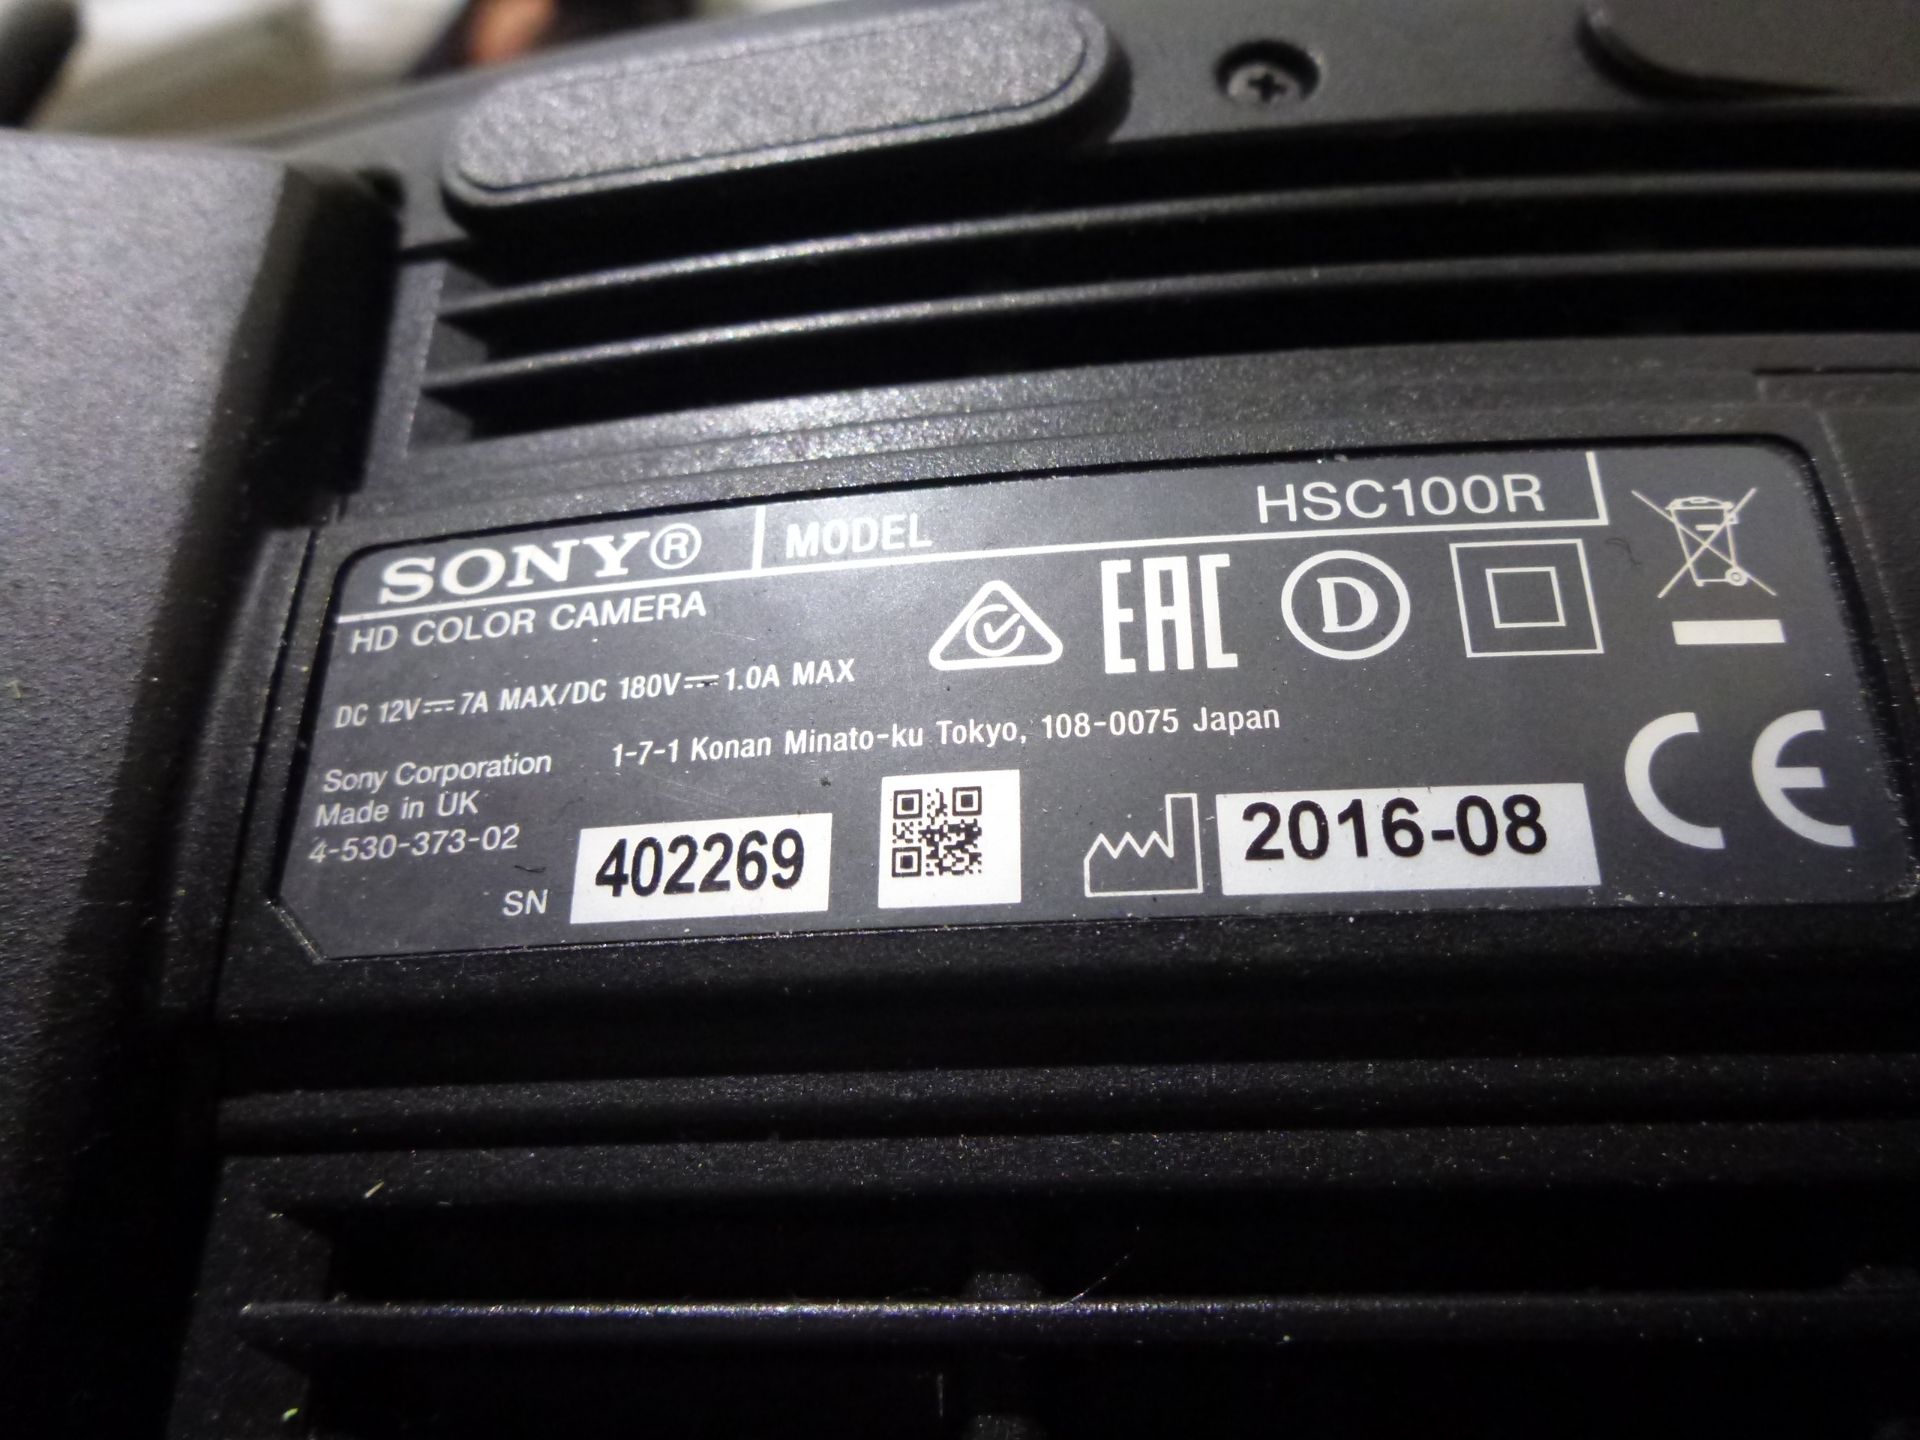 Sony HD Colour Broadcast Camera, Model HSC100R, S/N 402269, YOM 2016, Camera includes Canon HDTV - Image 9 of 28